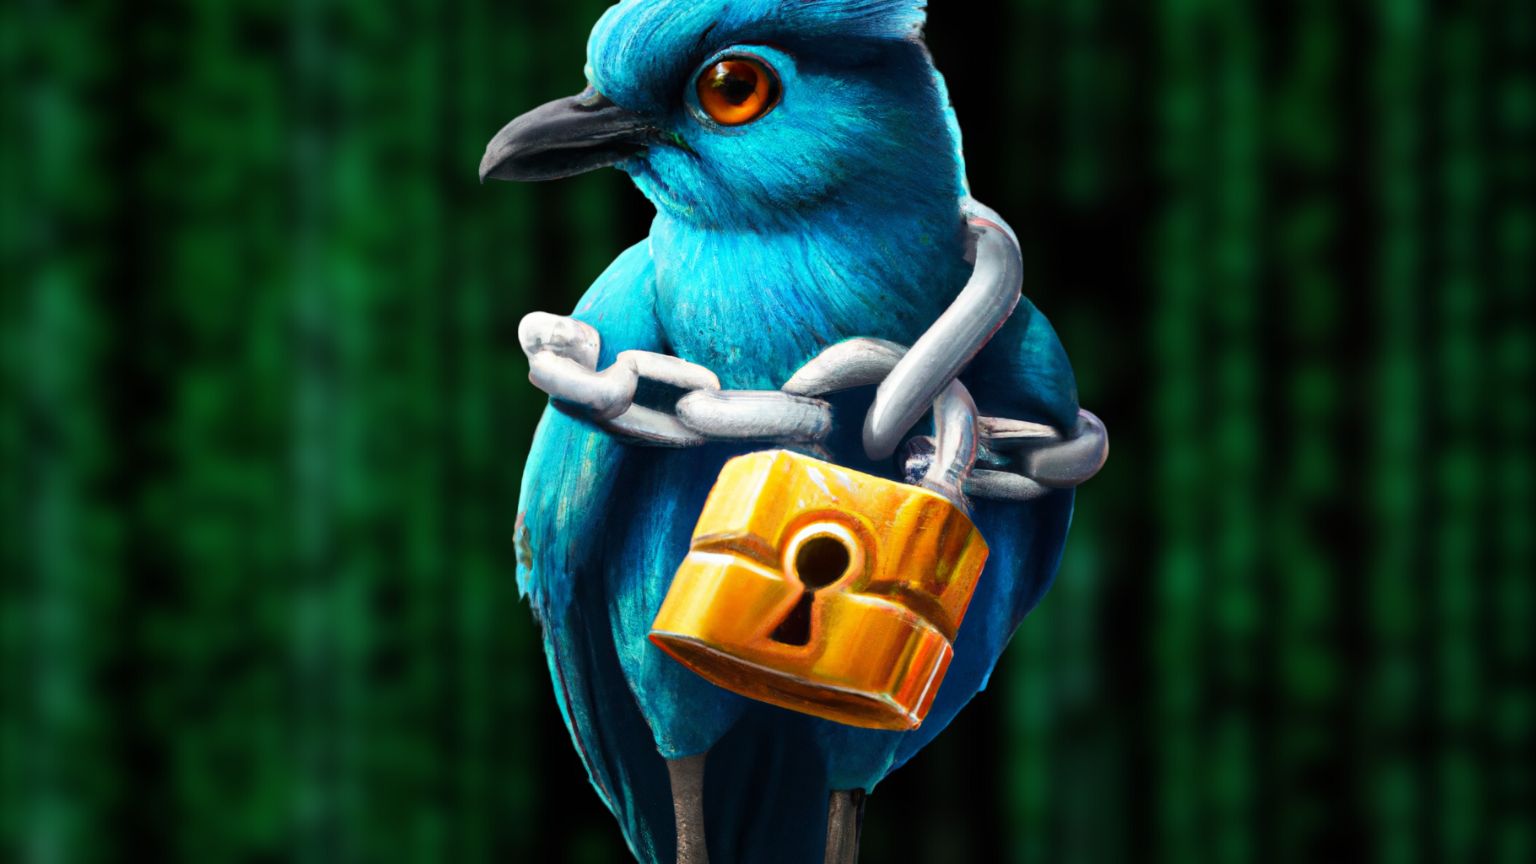 Ireland’s data protection office is looking into alleged “400 million” Twitter user hack